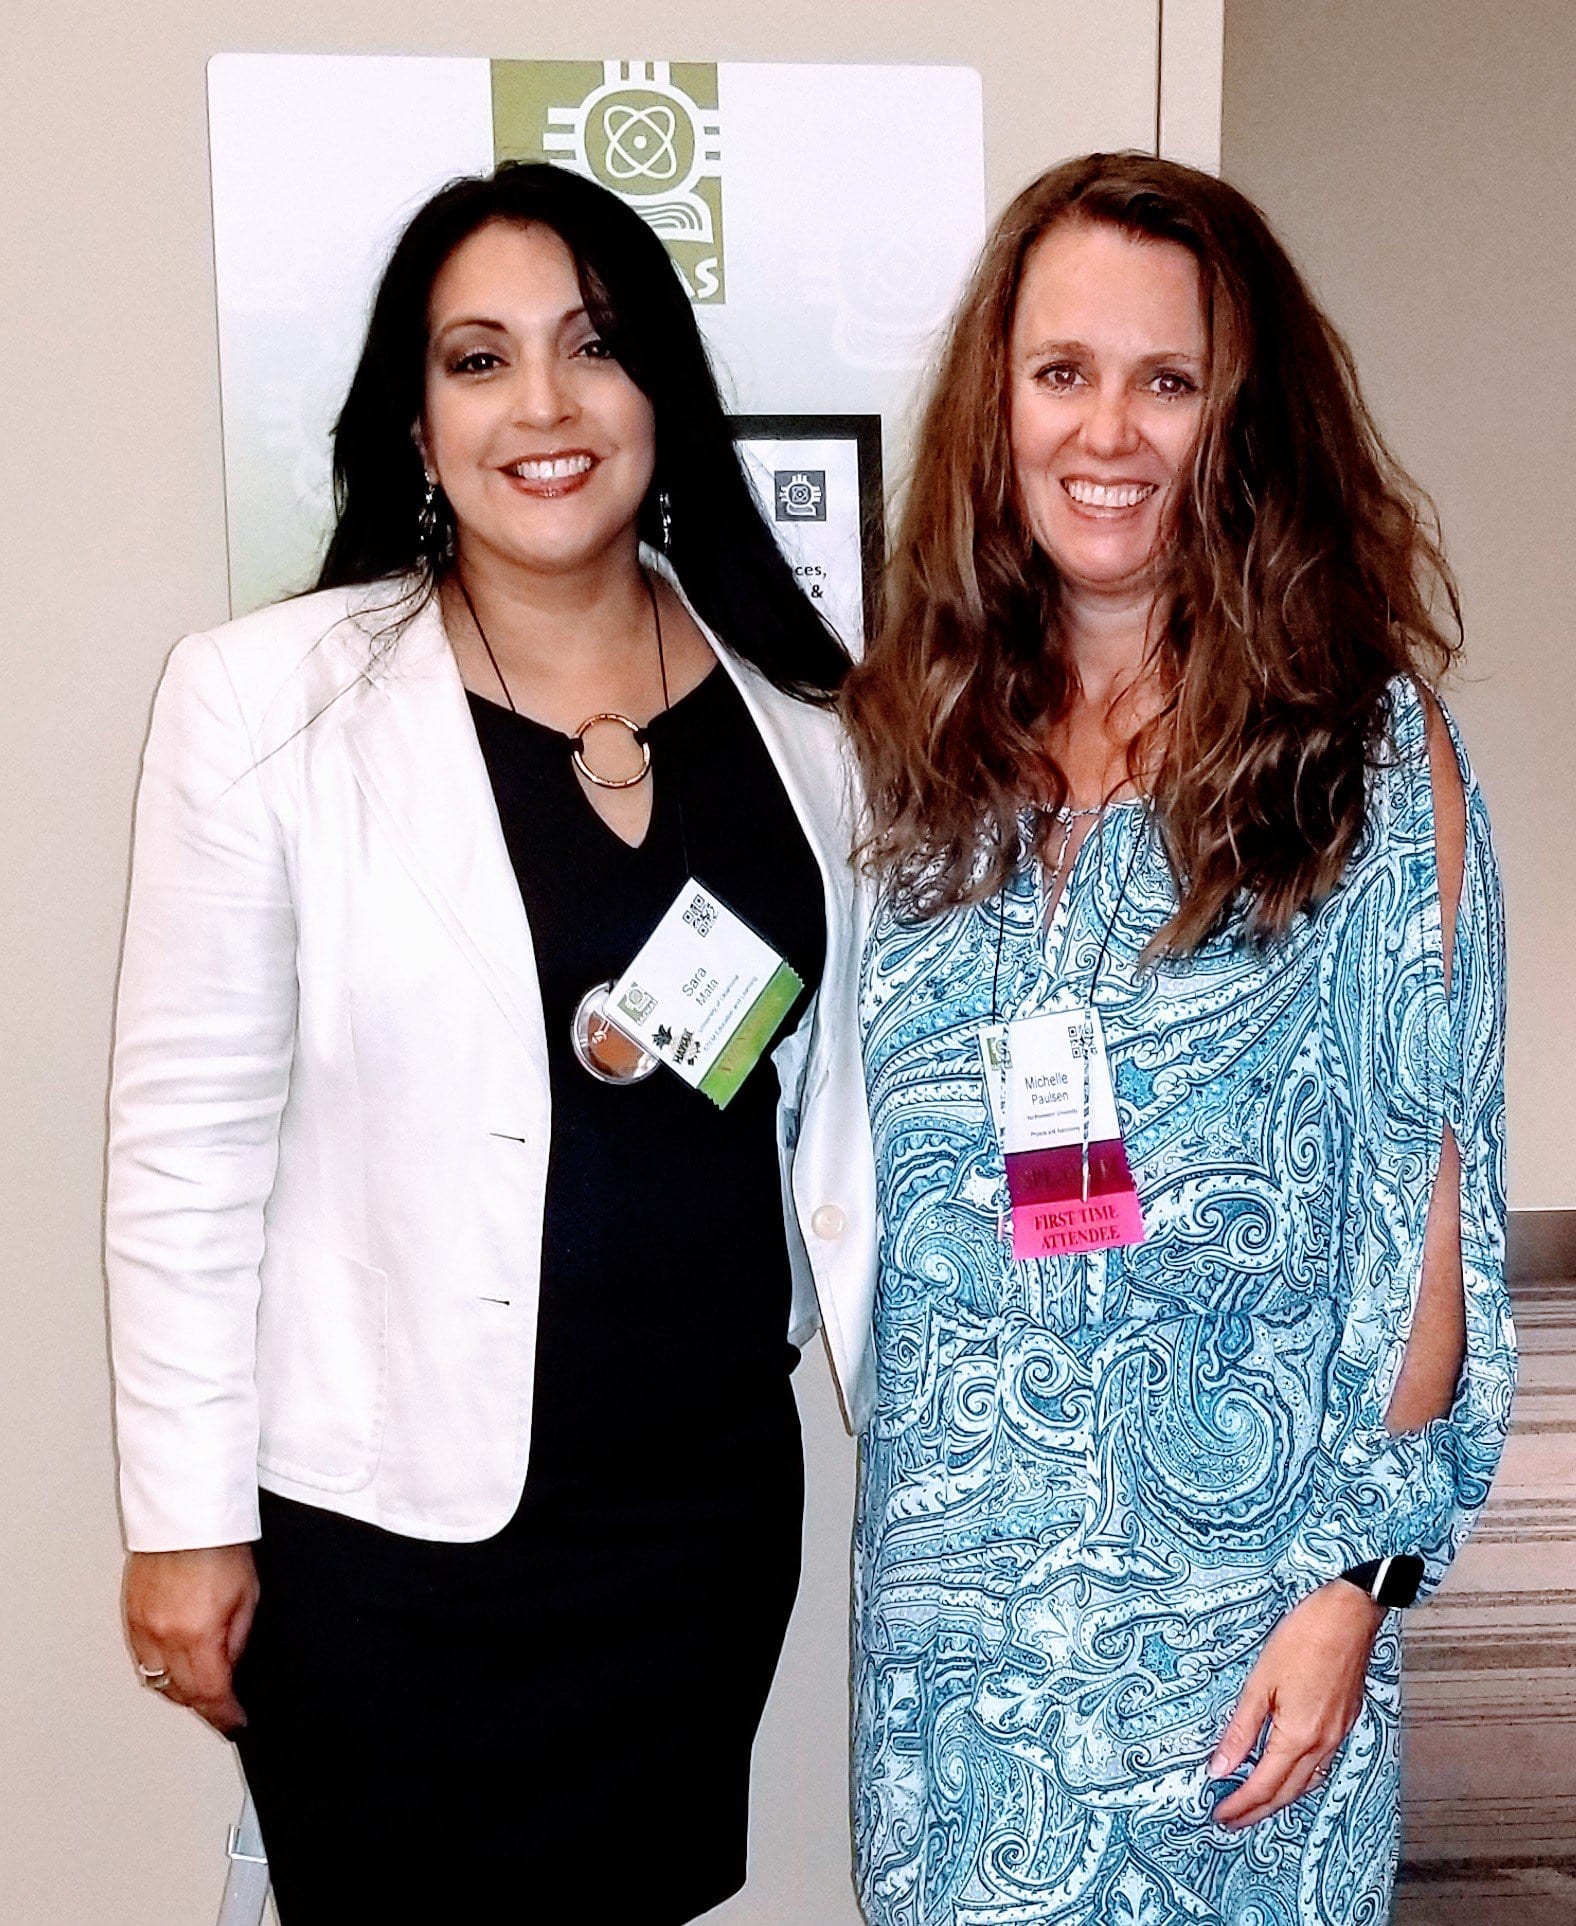 Michelle Paulsen Represents IDEAS at 2018 SACNAS Conference